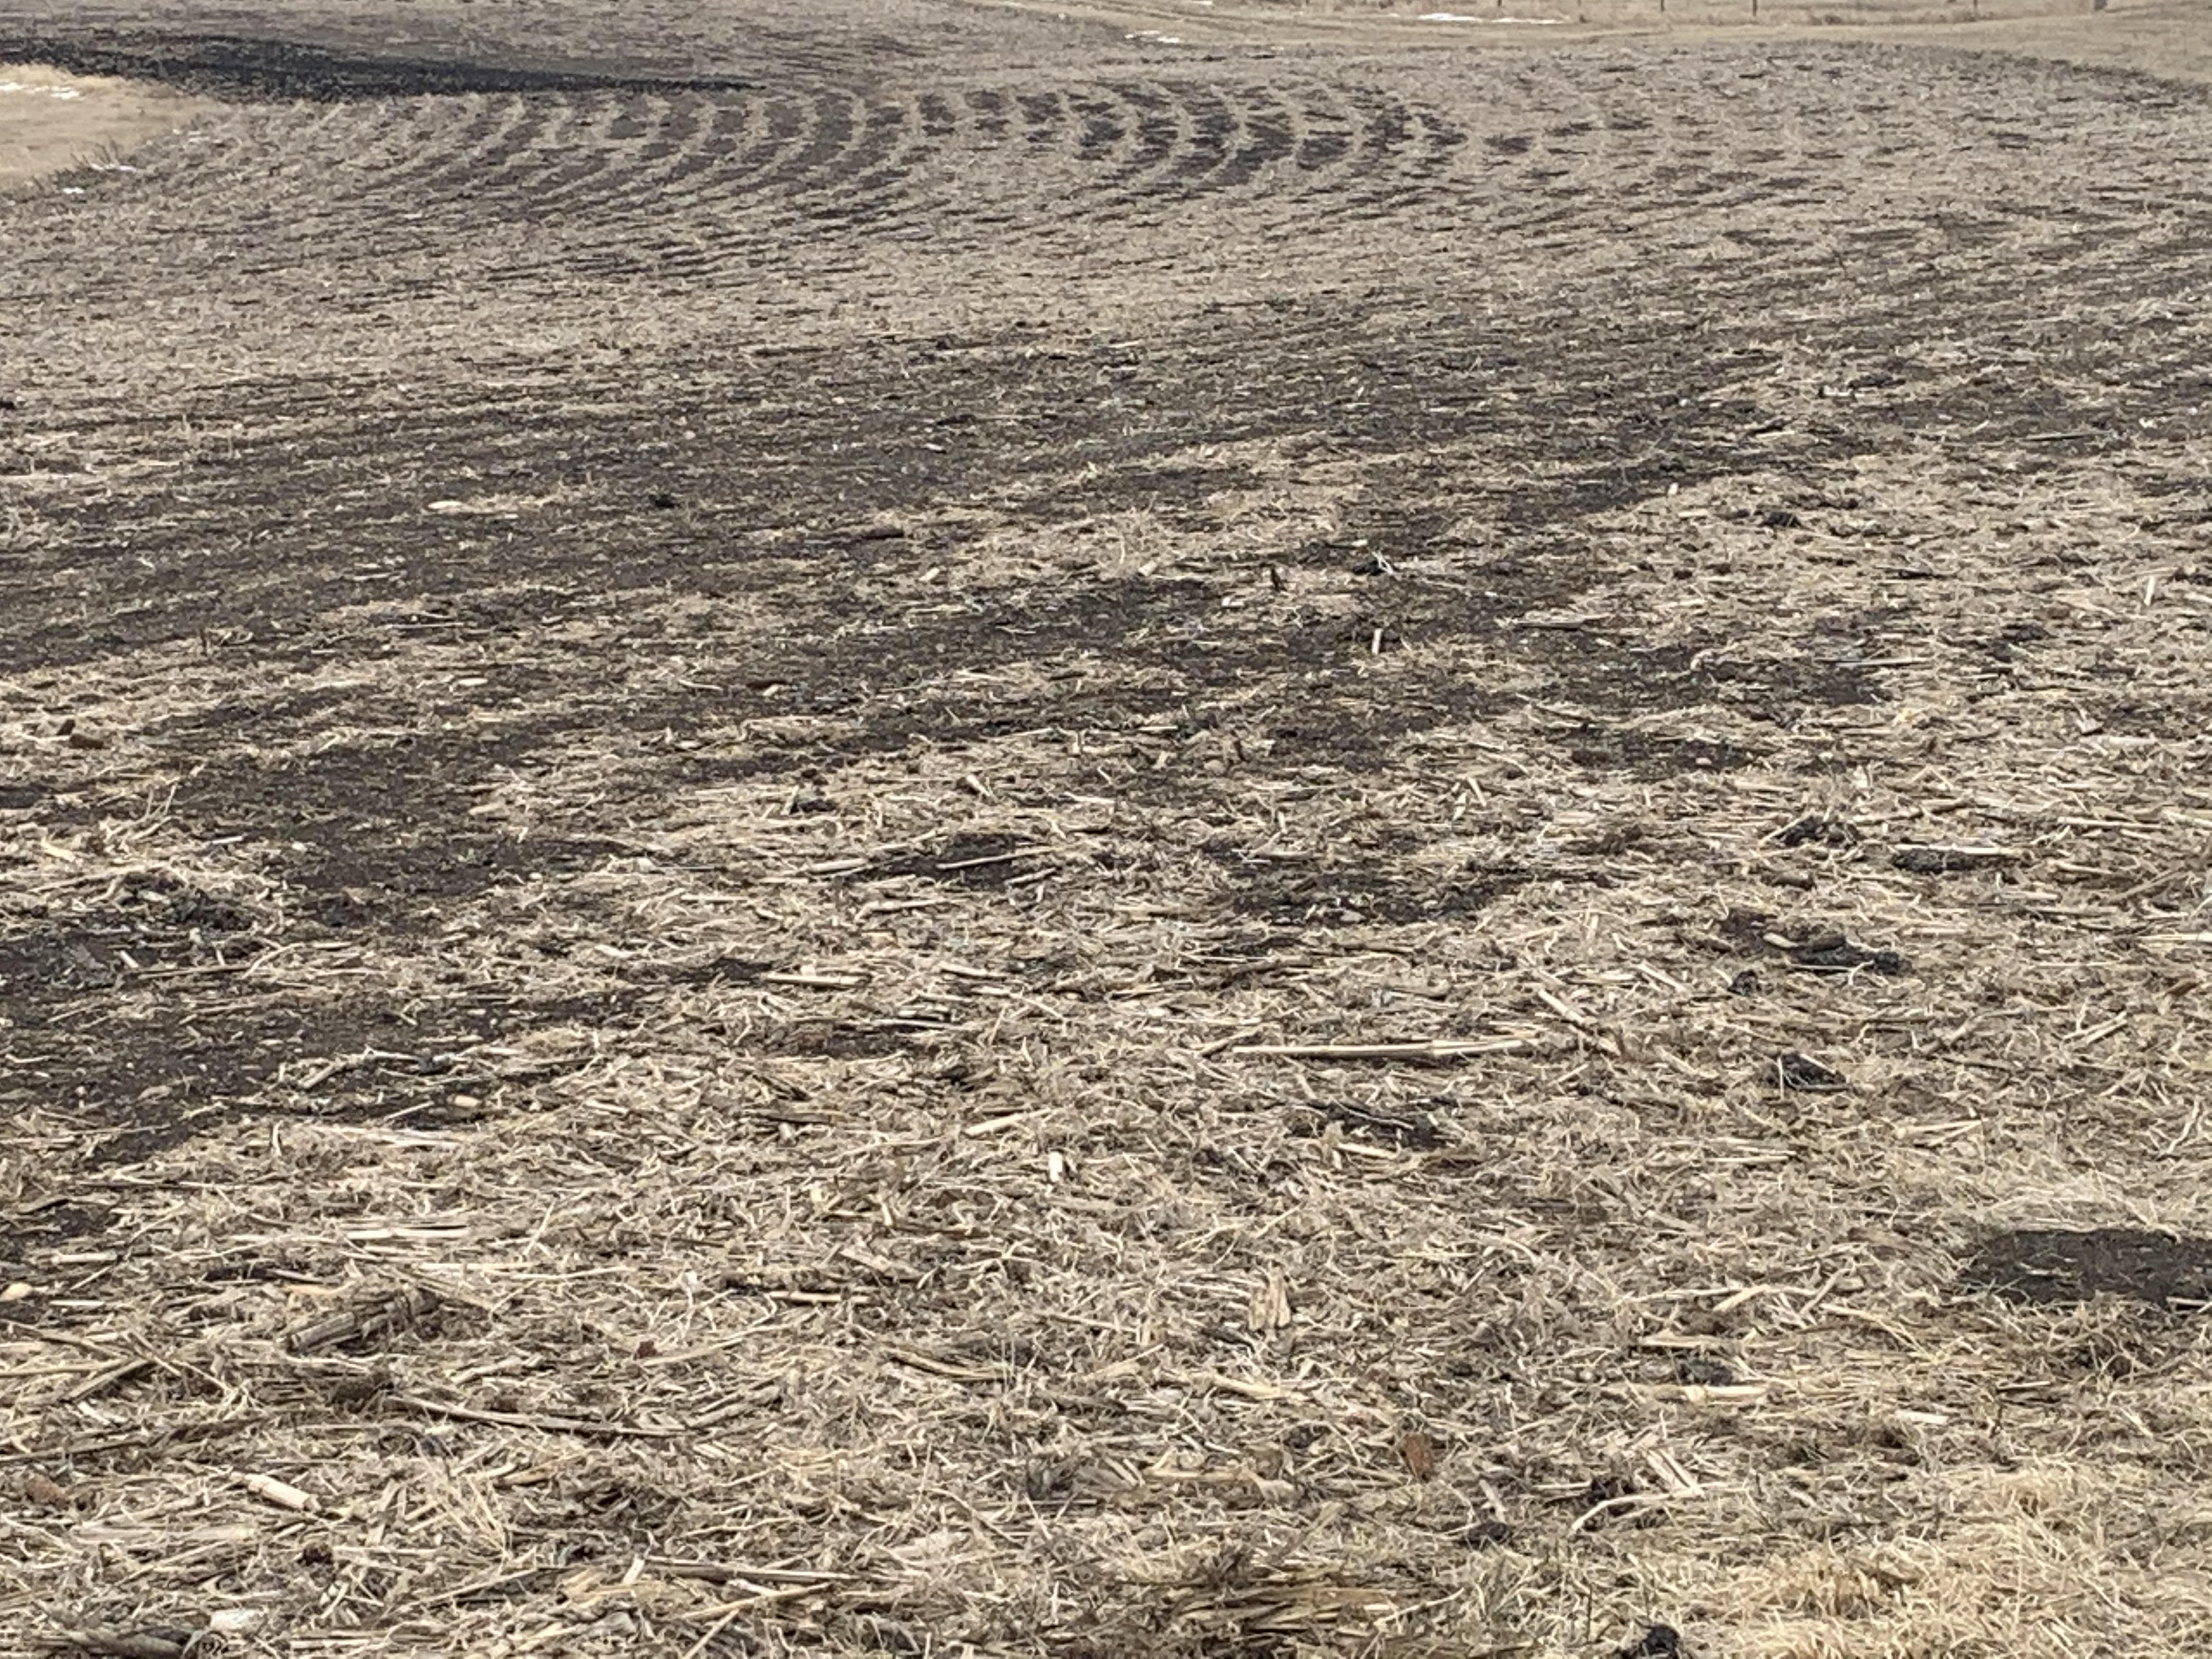 Morning Ag News, May 27, 2021: Update on drought conditions in South Dakota